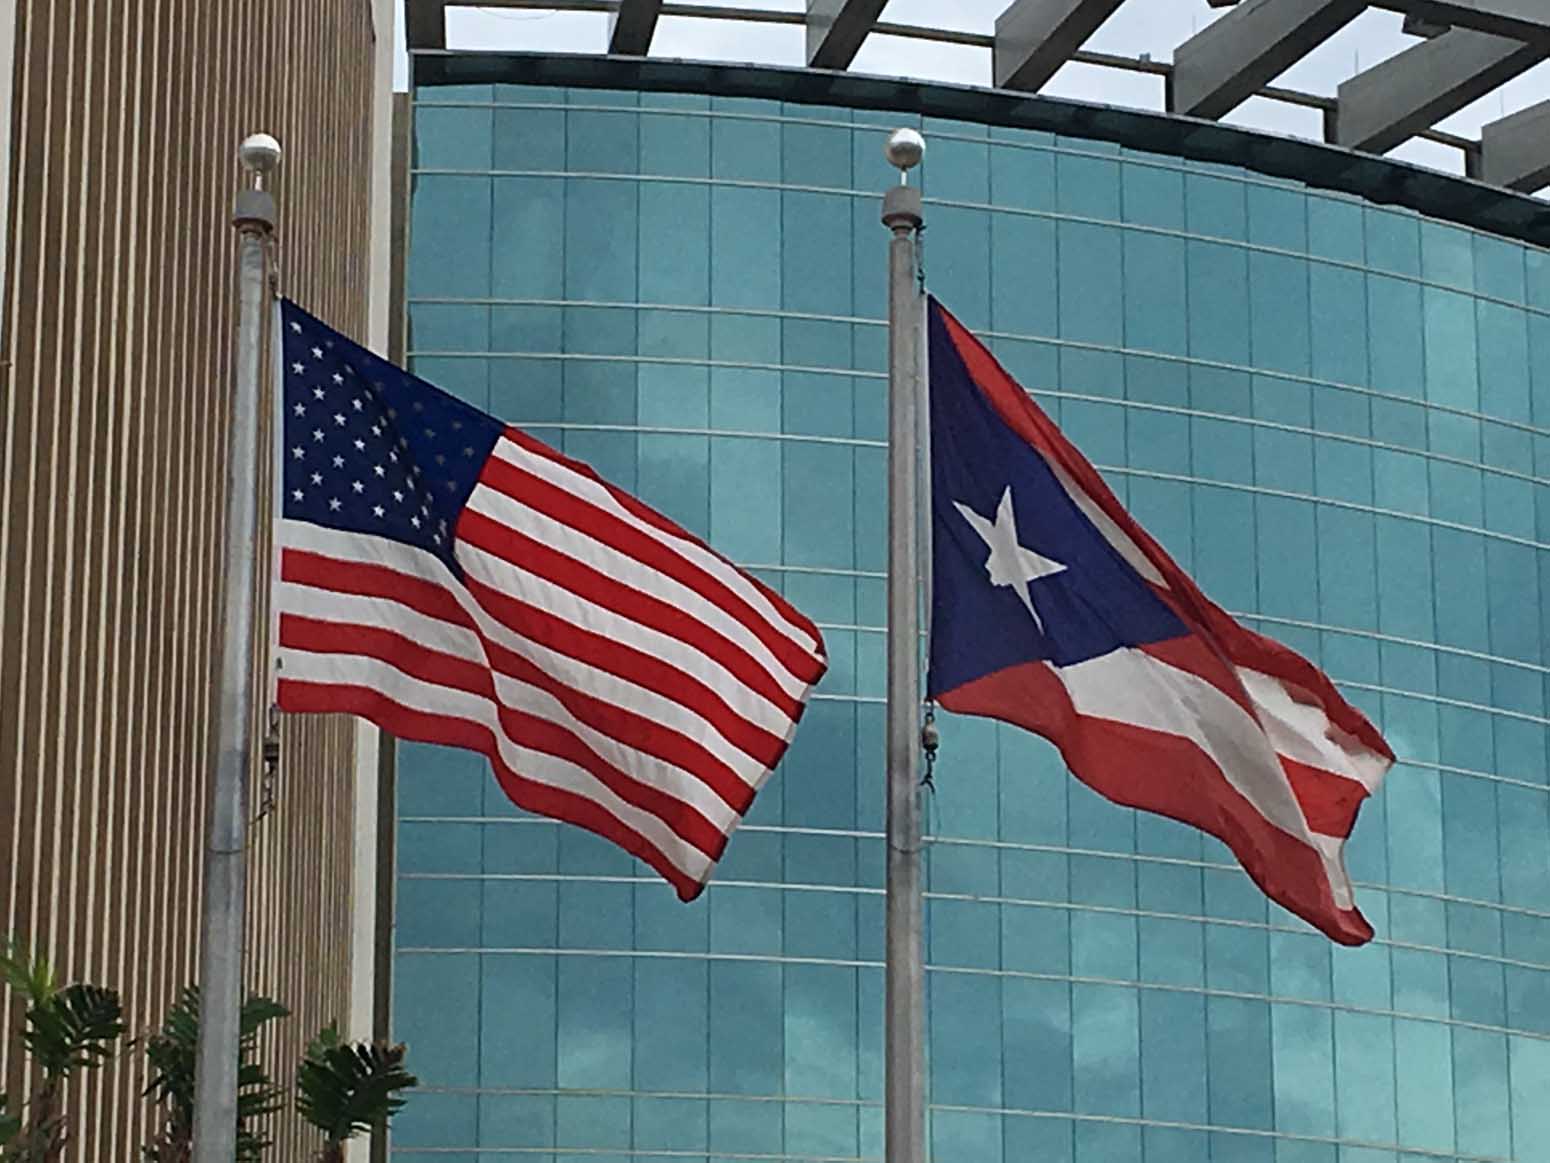 USA and Puerto Rico flags